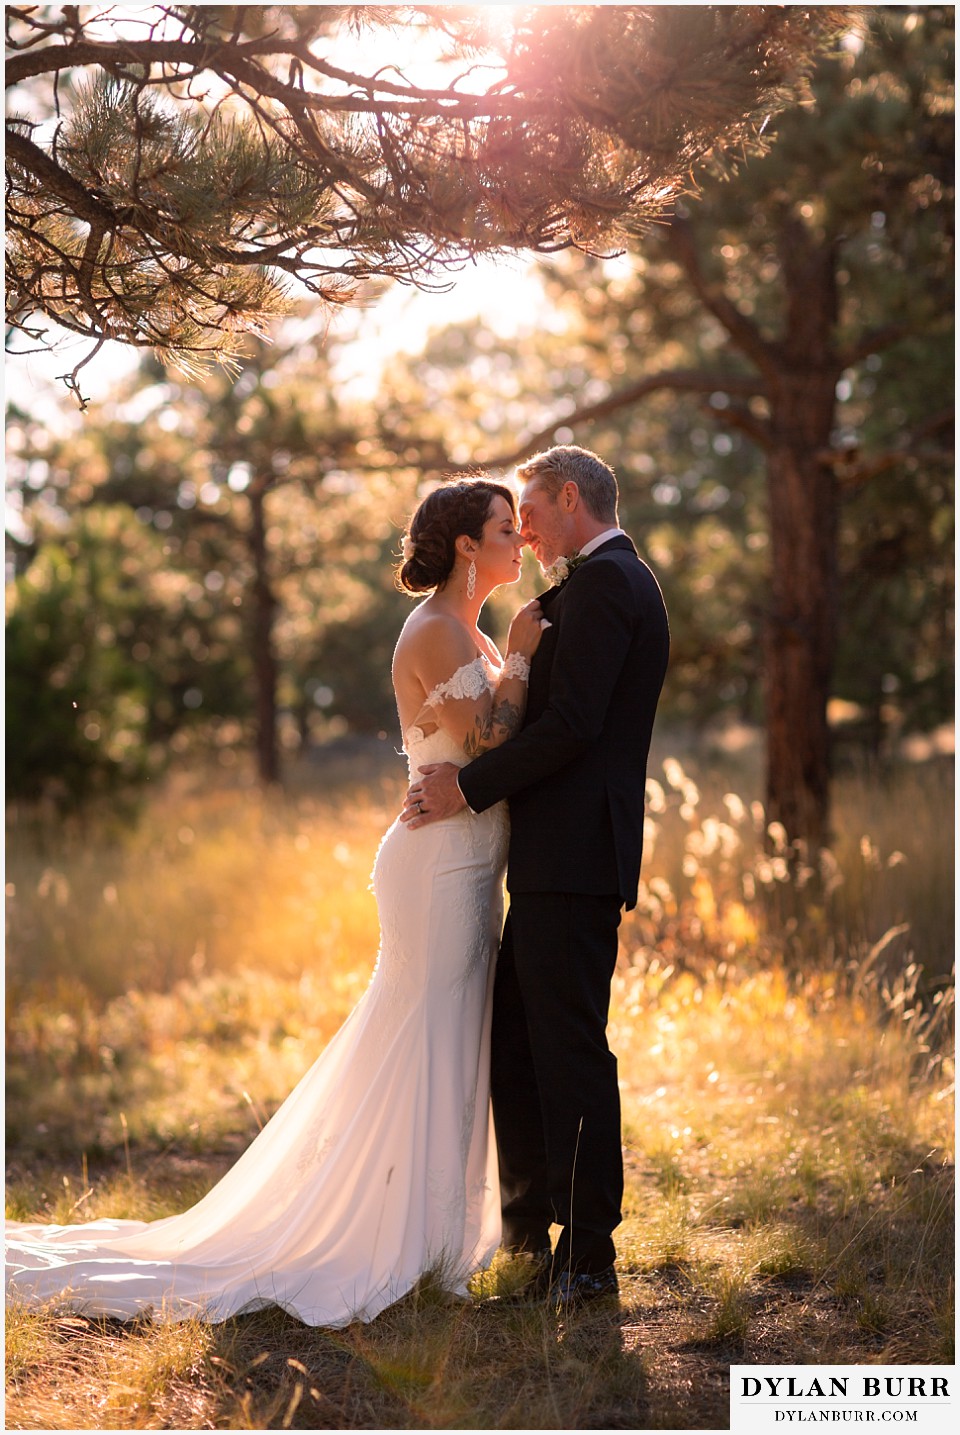 crystal rose lookout mountain wedding at sunset in pine trees